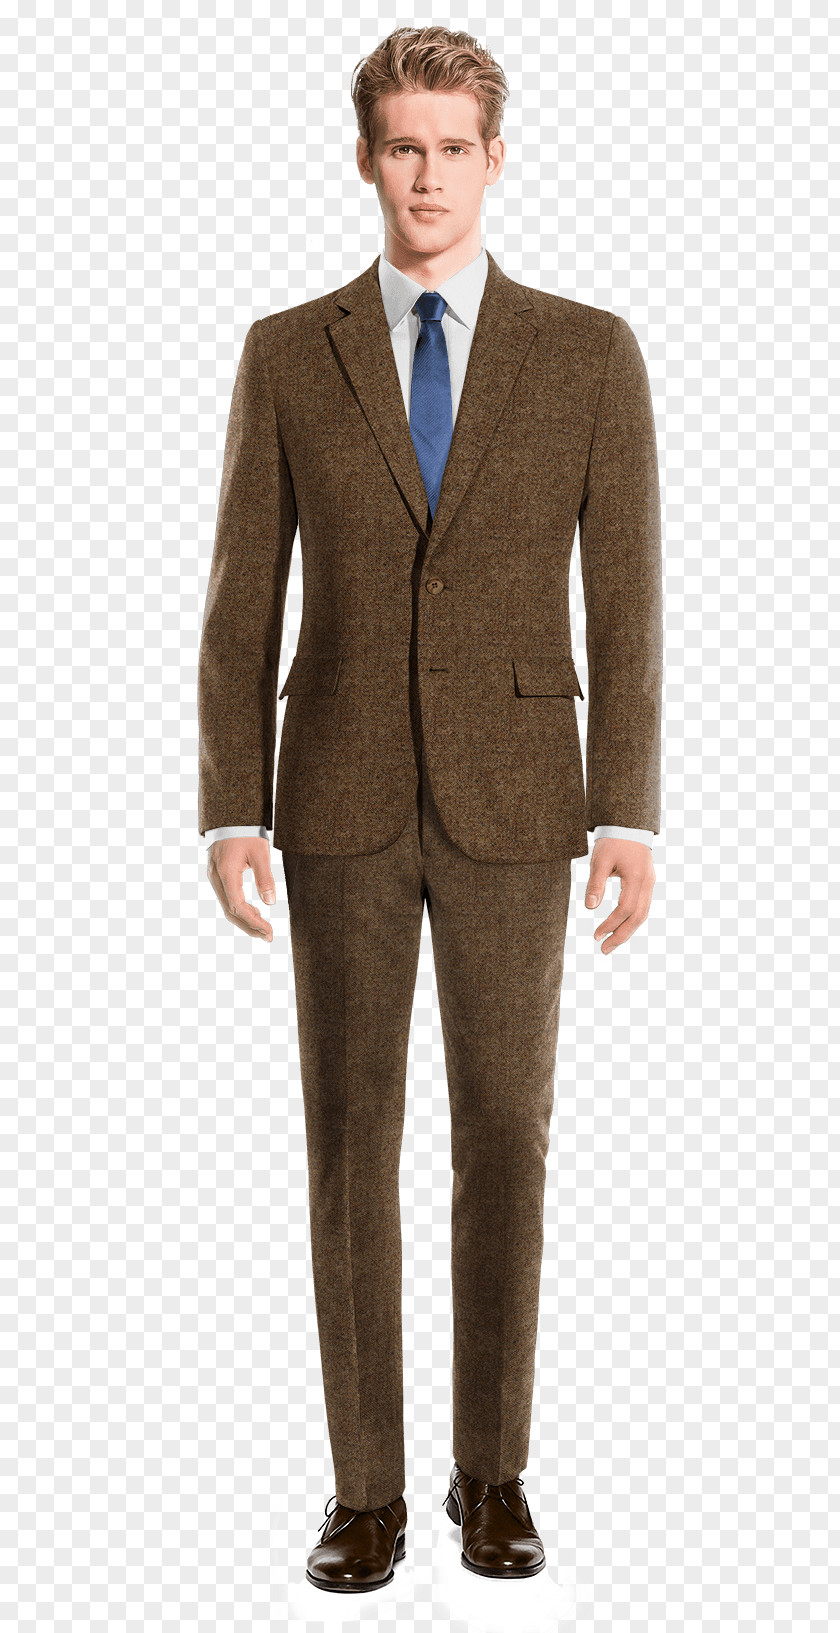 Men's Business Suit Pants Tweed Chino Cloth Wool PNG